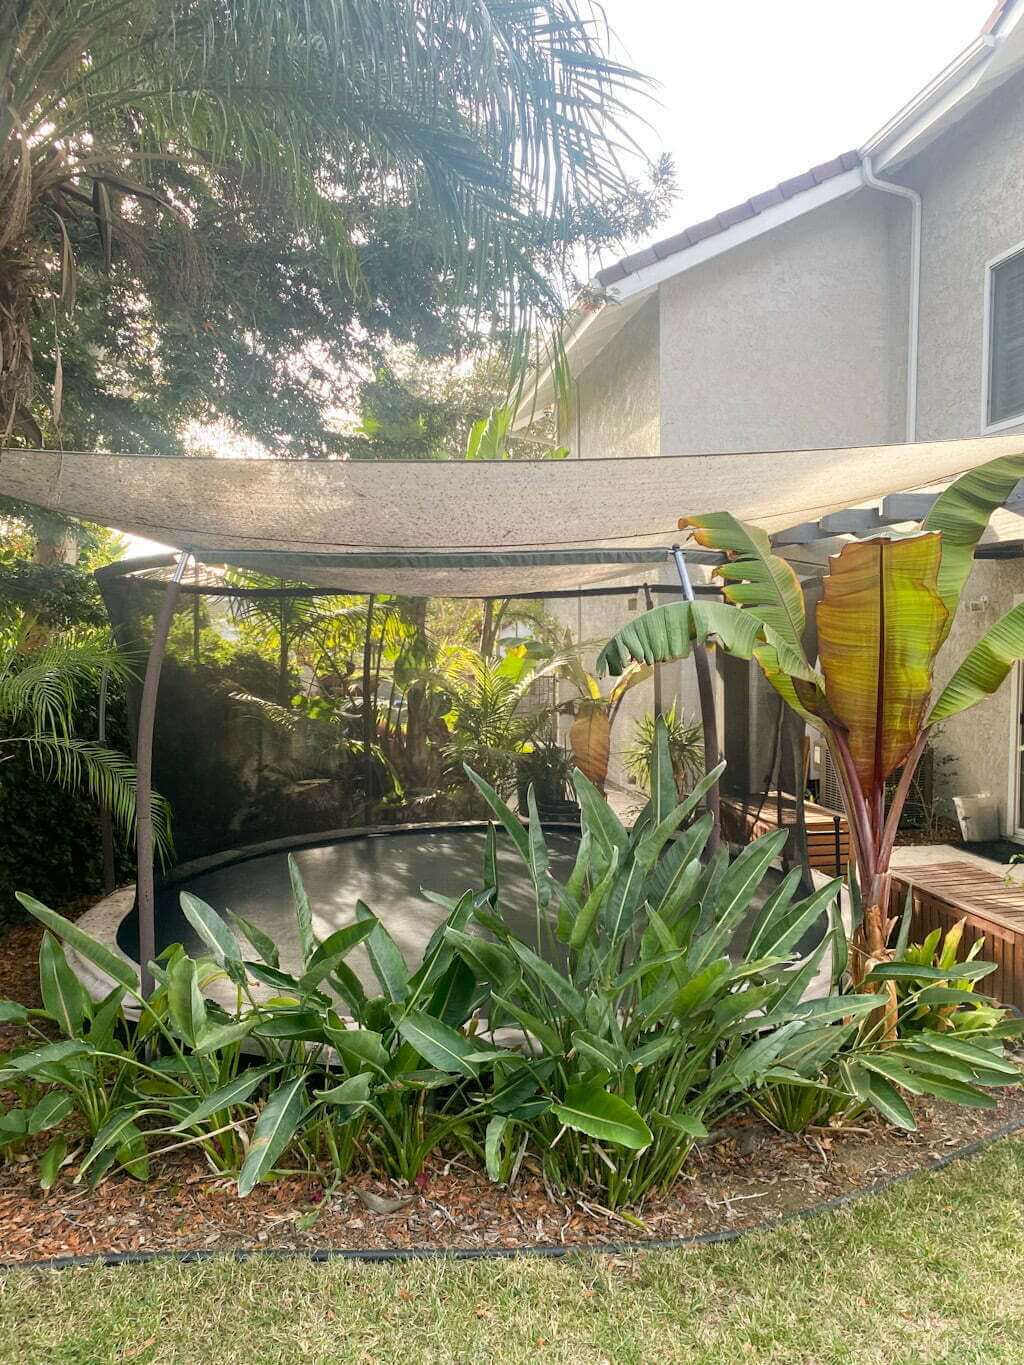 in-ground trampoline with birds of paradise and sail shade above